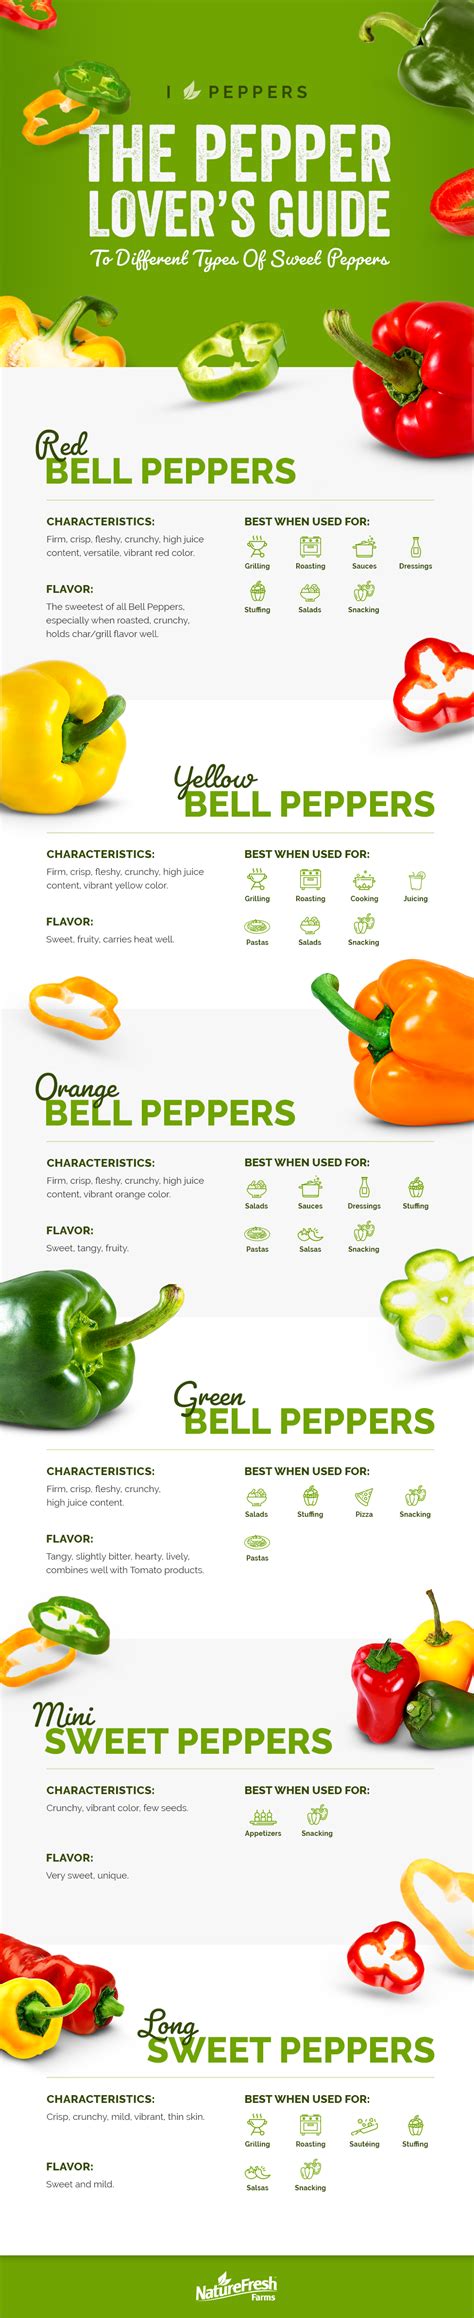 Types Of Peppers Guide